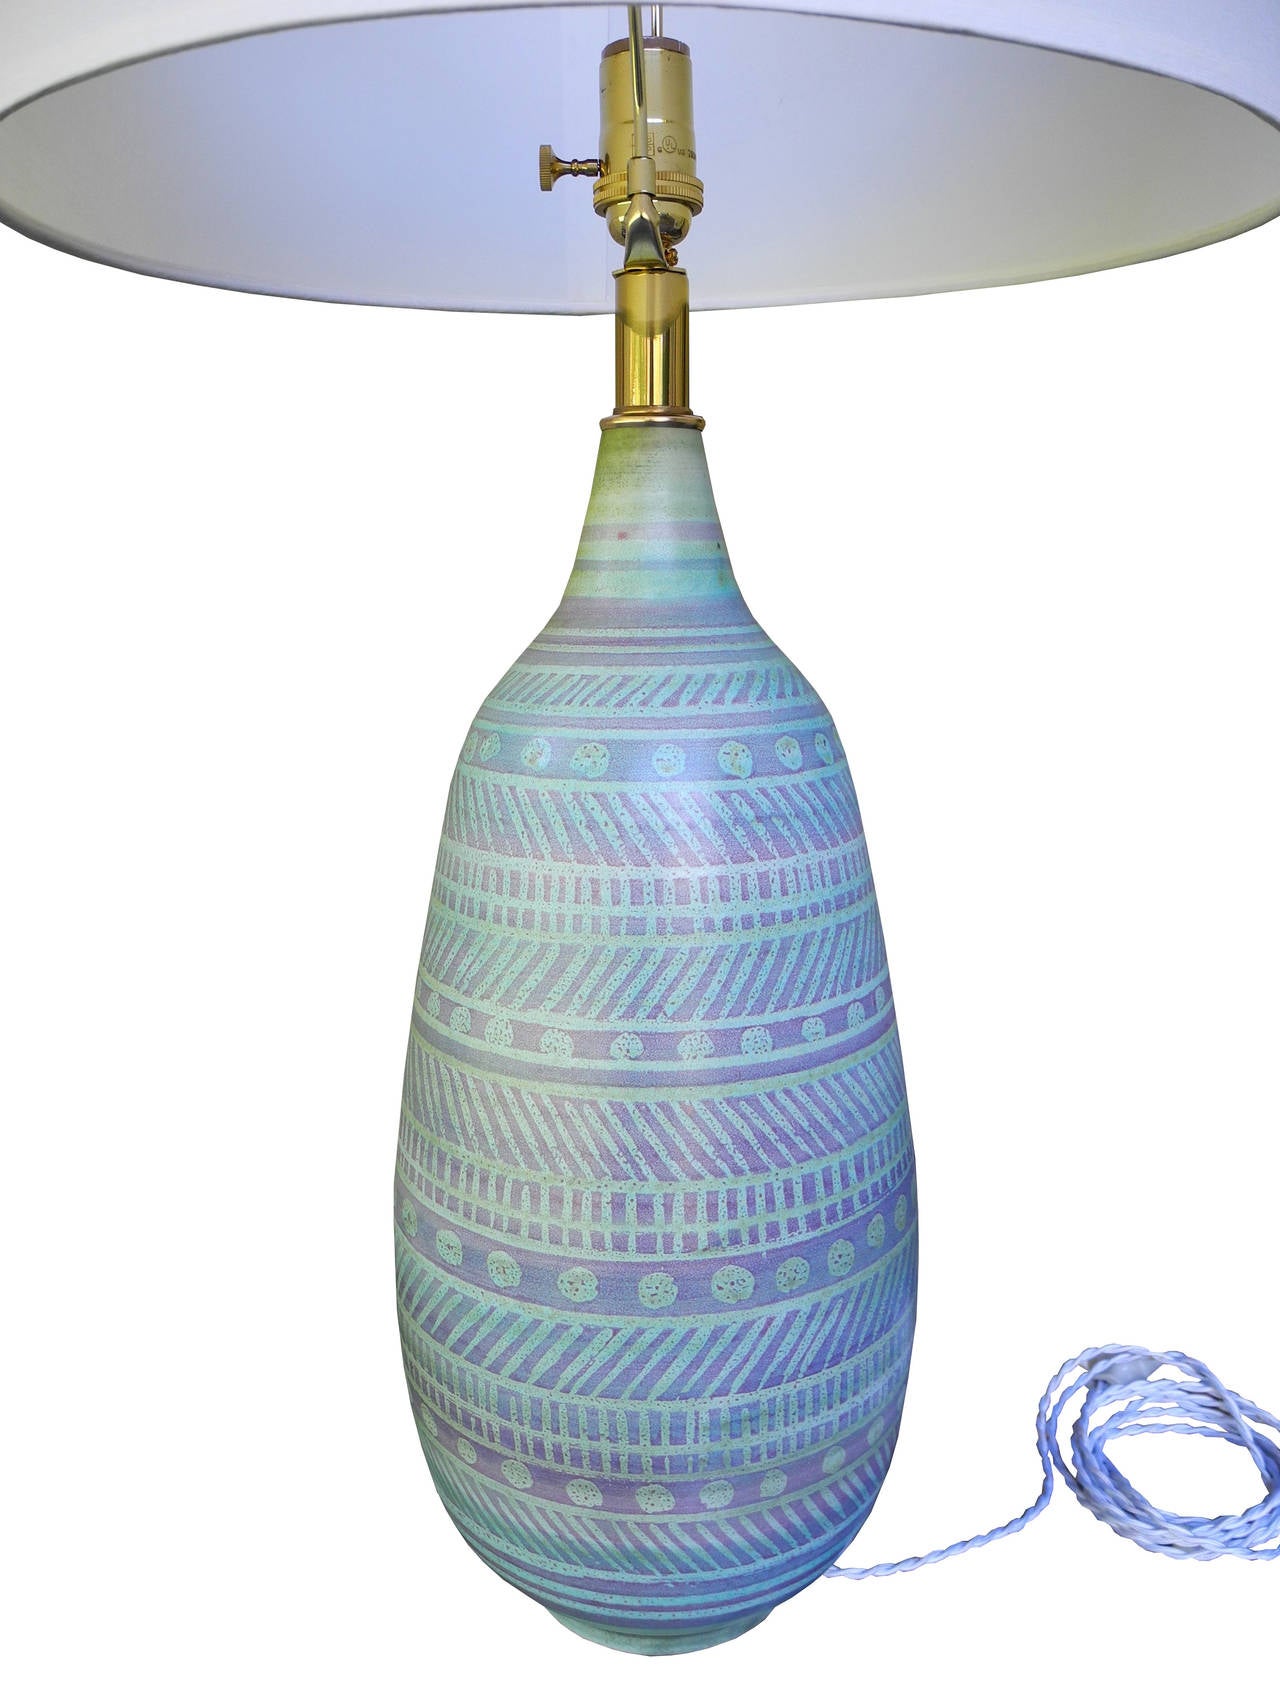 Beautiful handmade ceramic lamp by Design Technics in a lavender, turquoise and green glaze. Rewired with a white silk twisted wire and brass socket.
Top if the finial measures 28 inches. Top of the ceramic measures 19 inches.
The diameter of the